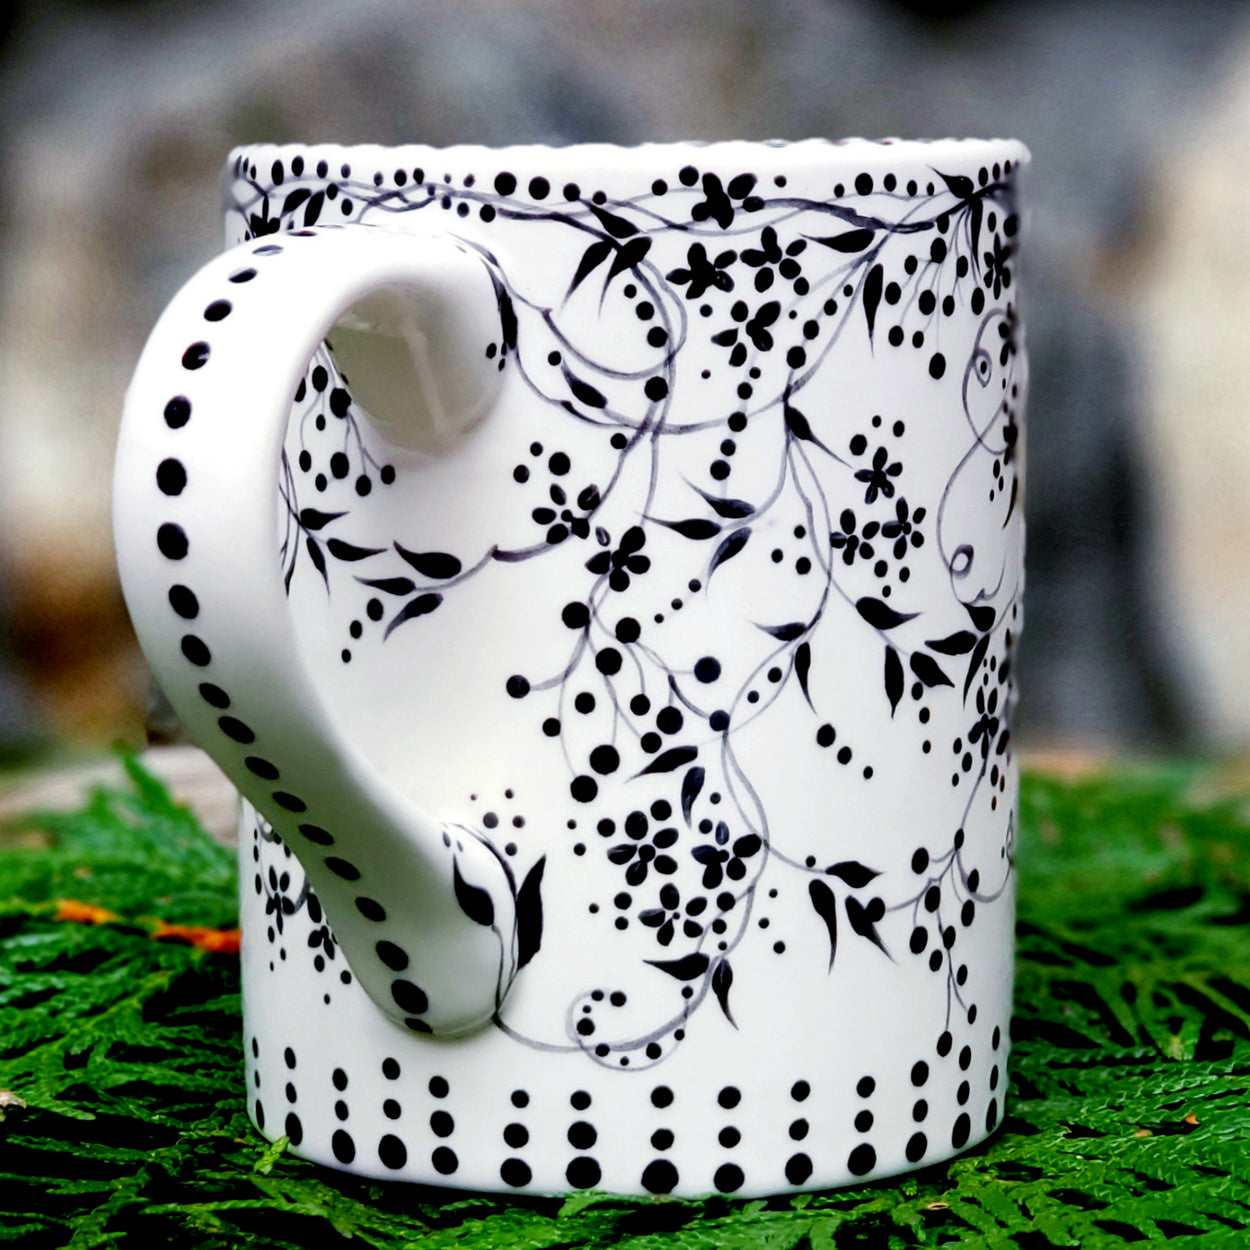 Hand painted black and white mug with trailing vines and berries and tiny flowers. Lovely satin glaze. 16 oz kiln fired ceramic mug